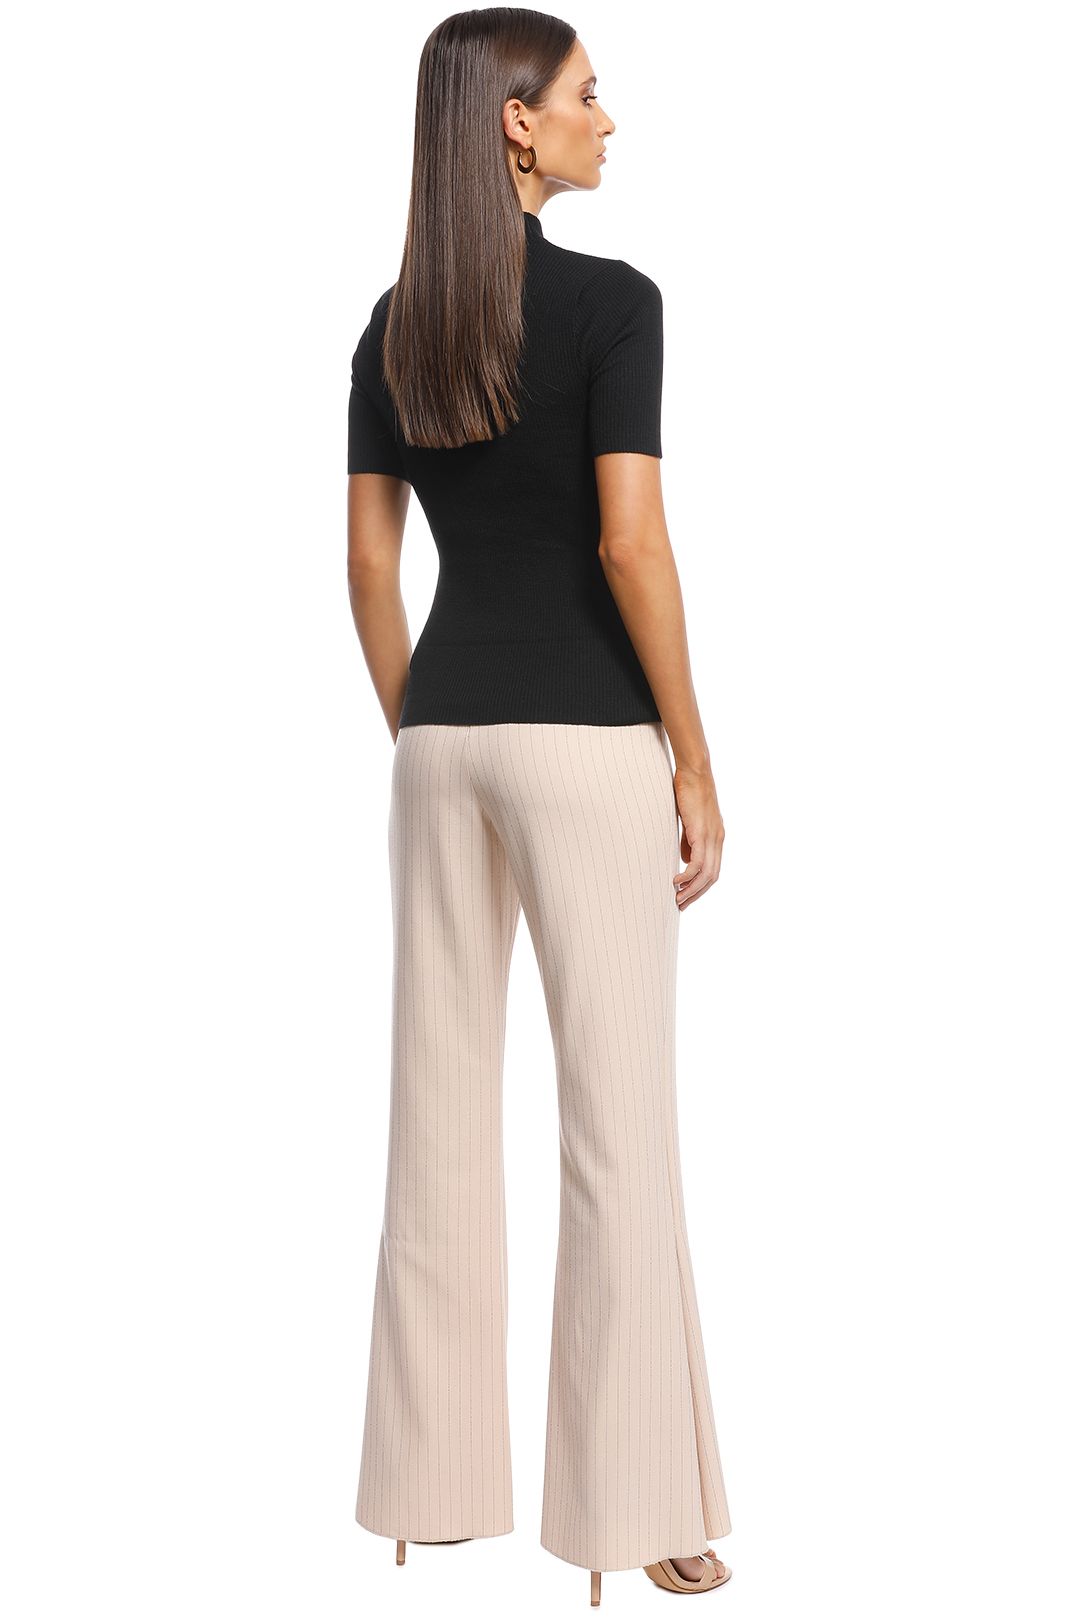 CMEO Collective - Go From Here Pant - Nude - Back